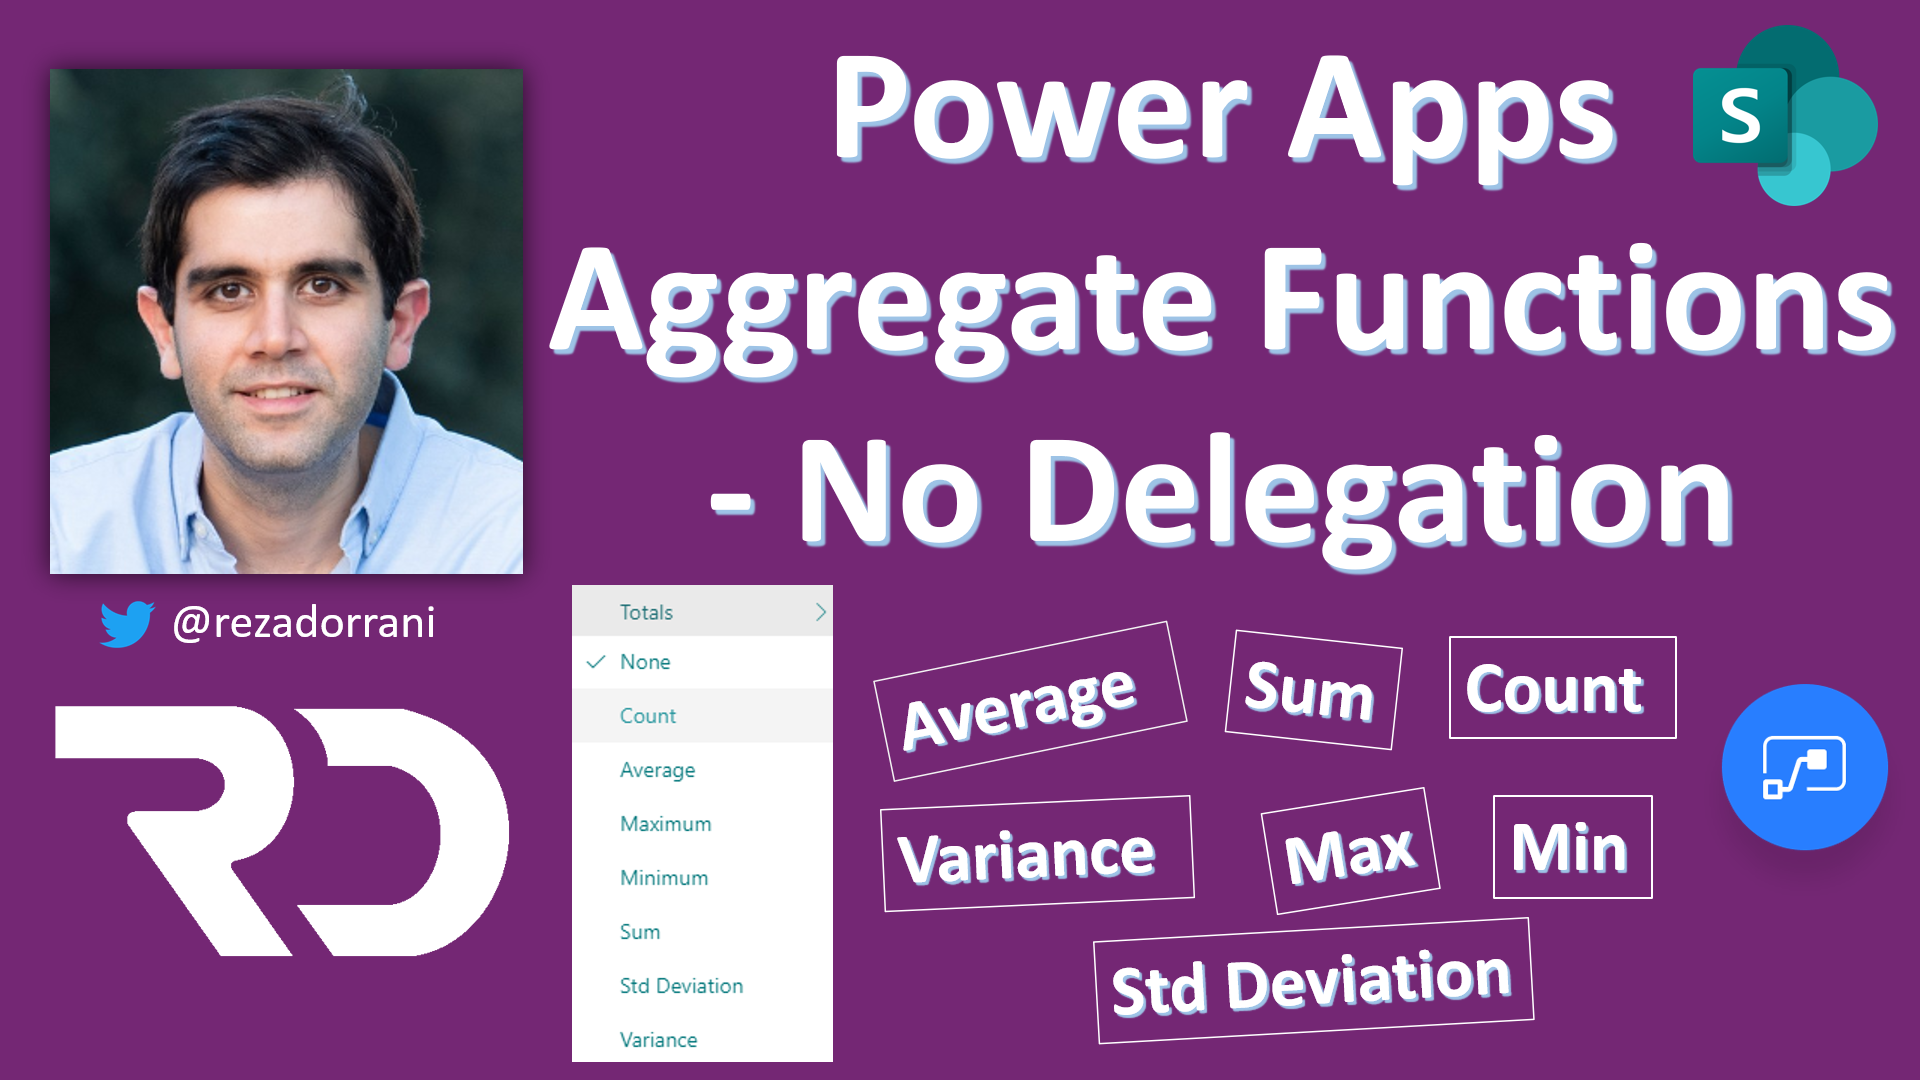 Power Apps Aggregate Functions – No Delegation warnings with Sum, Average, Count